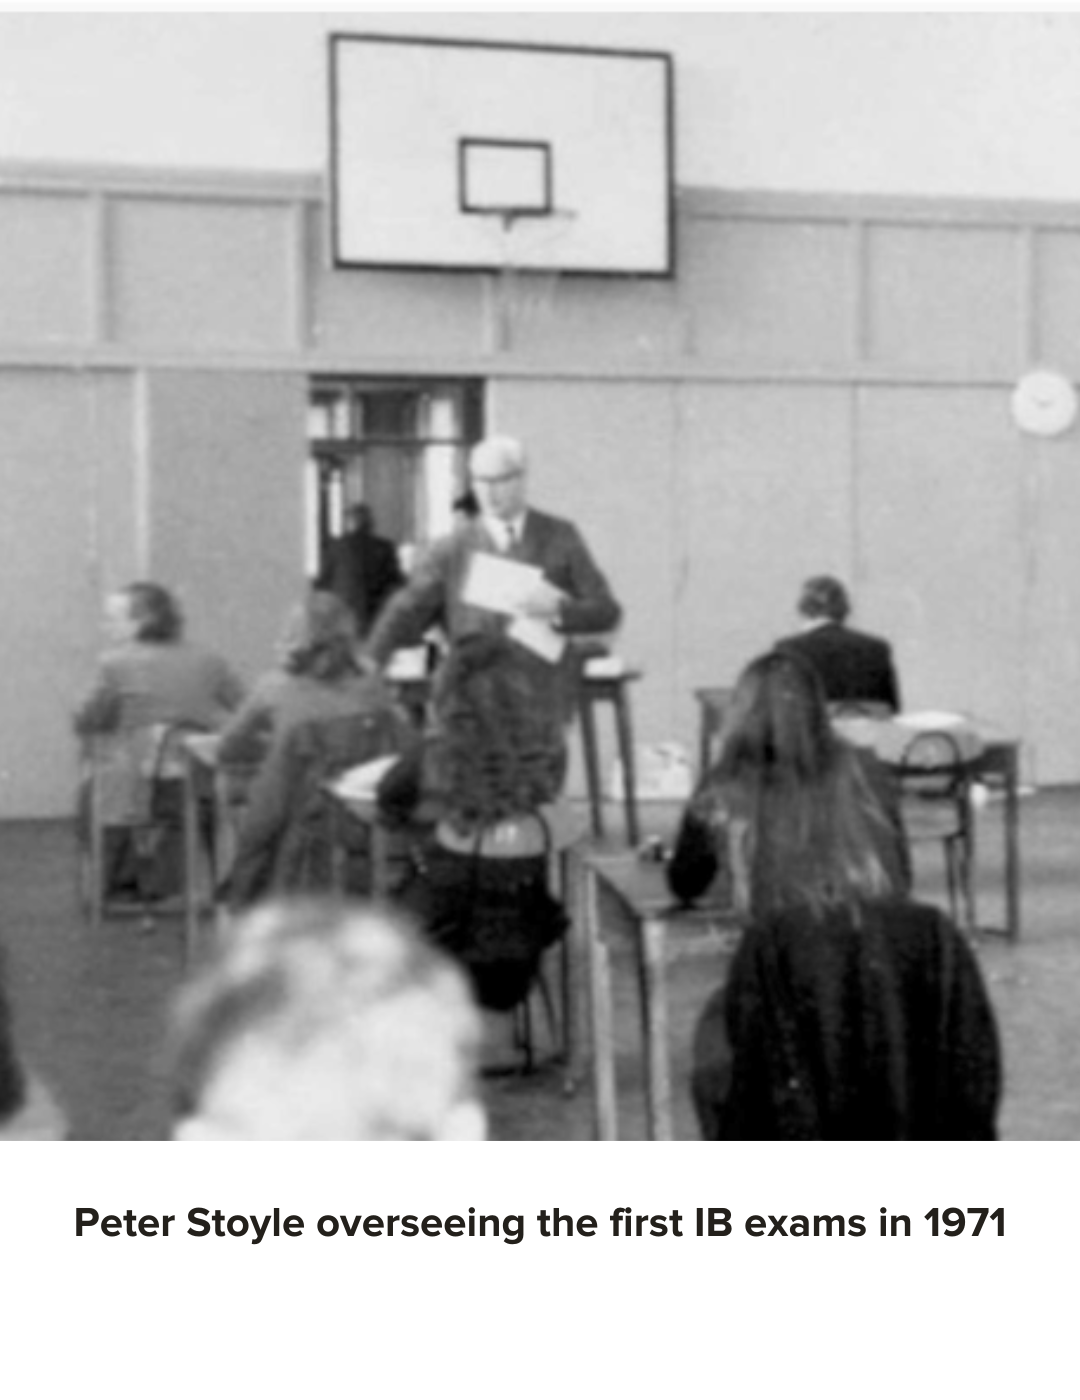 Peter Stoyle overseeing the first IB exams